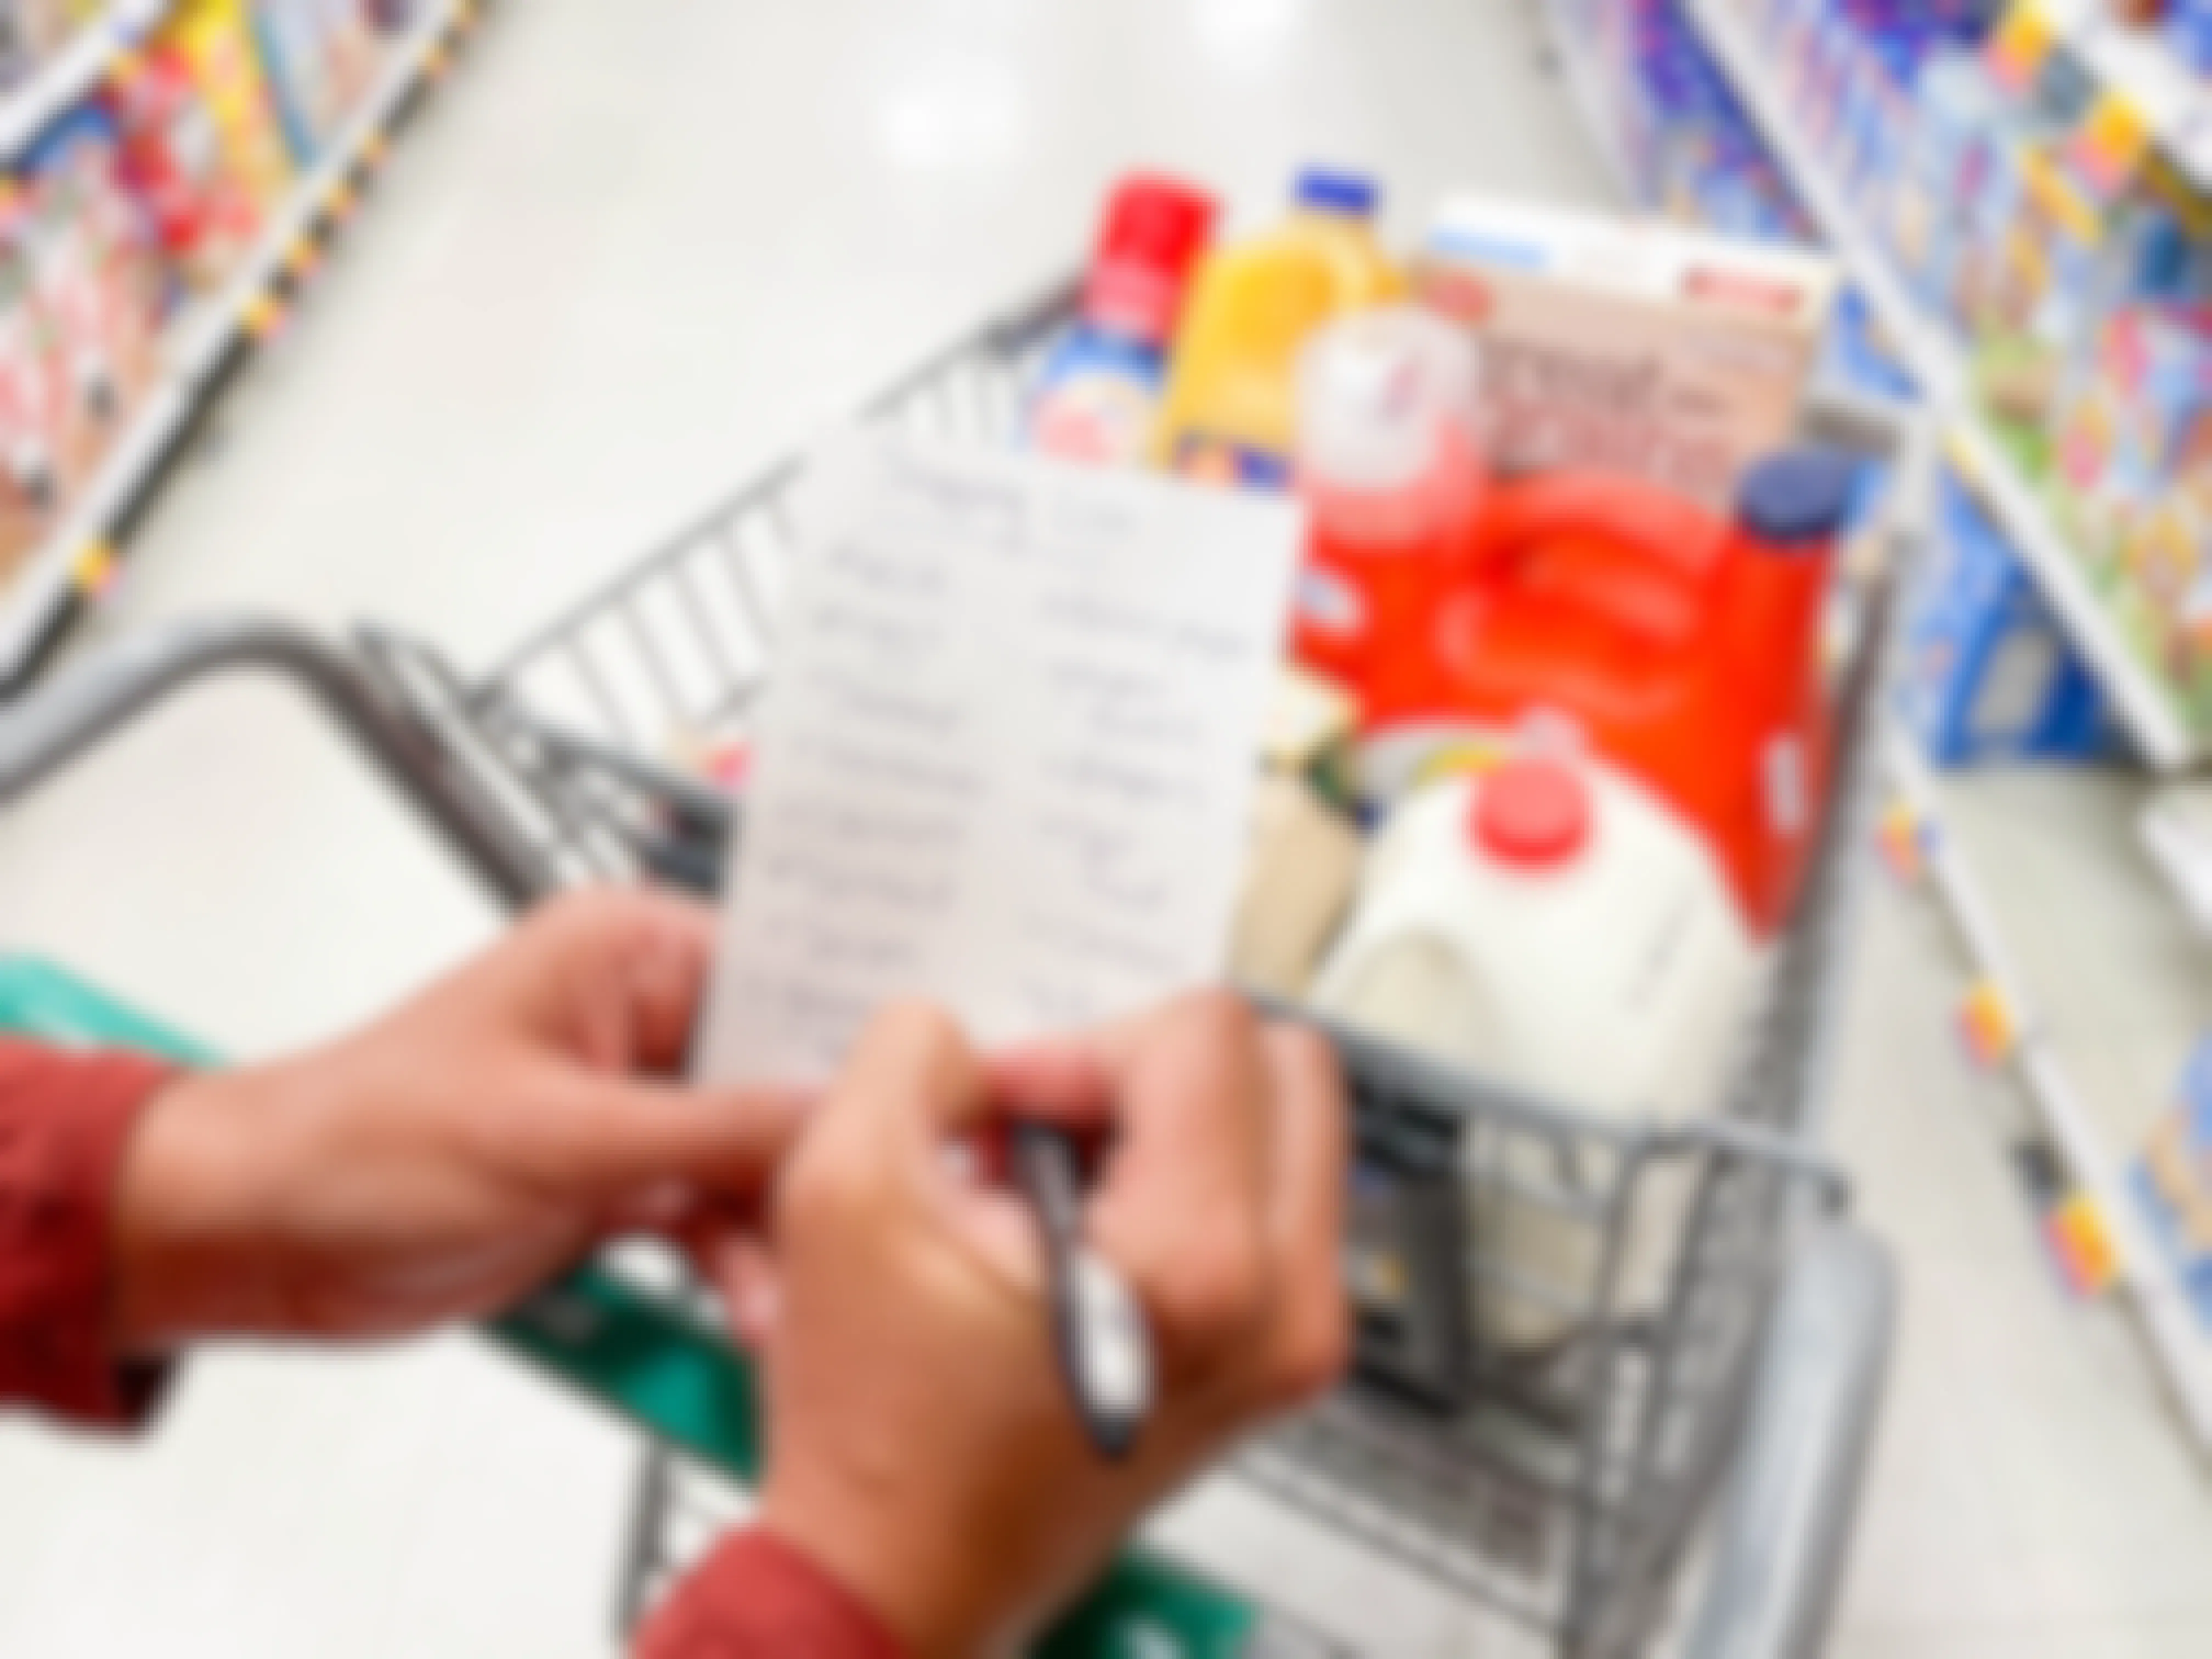 A woman at the grocery store, using a pen to check off an item on her shopping list while resting her hands and wrists on her shopping cart filled with milk, laundry detergent, orange juice, cereal, and other grocery items.